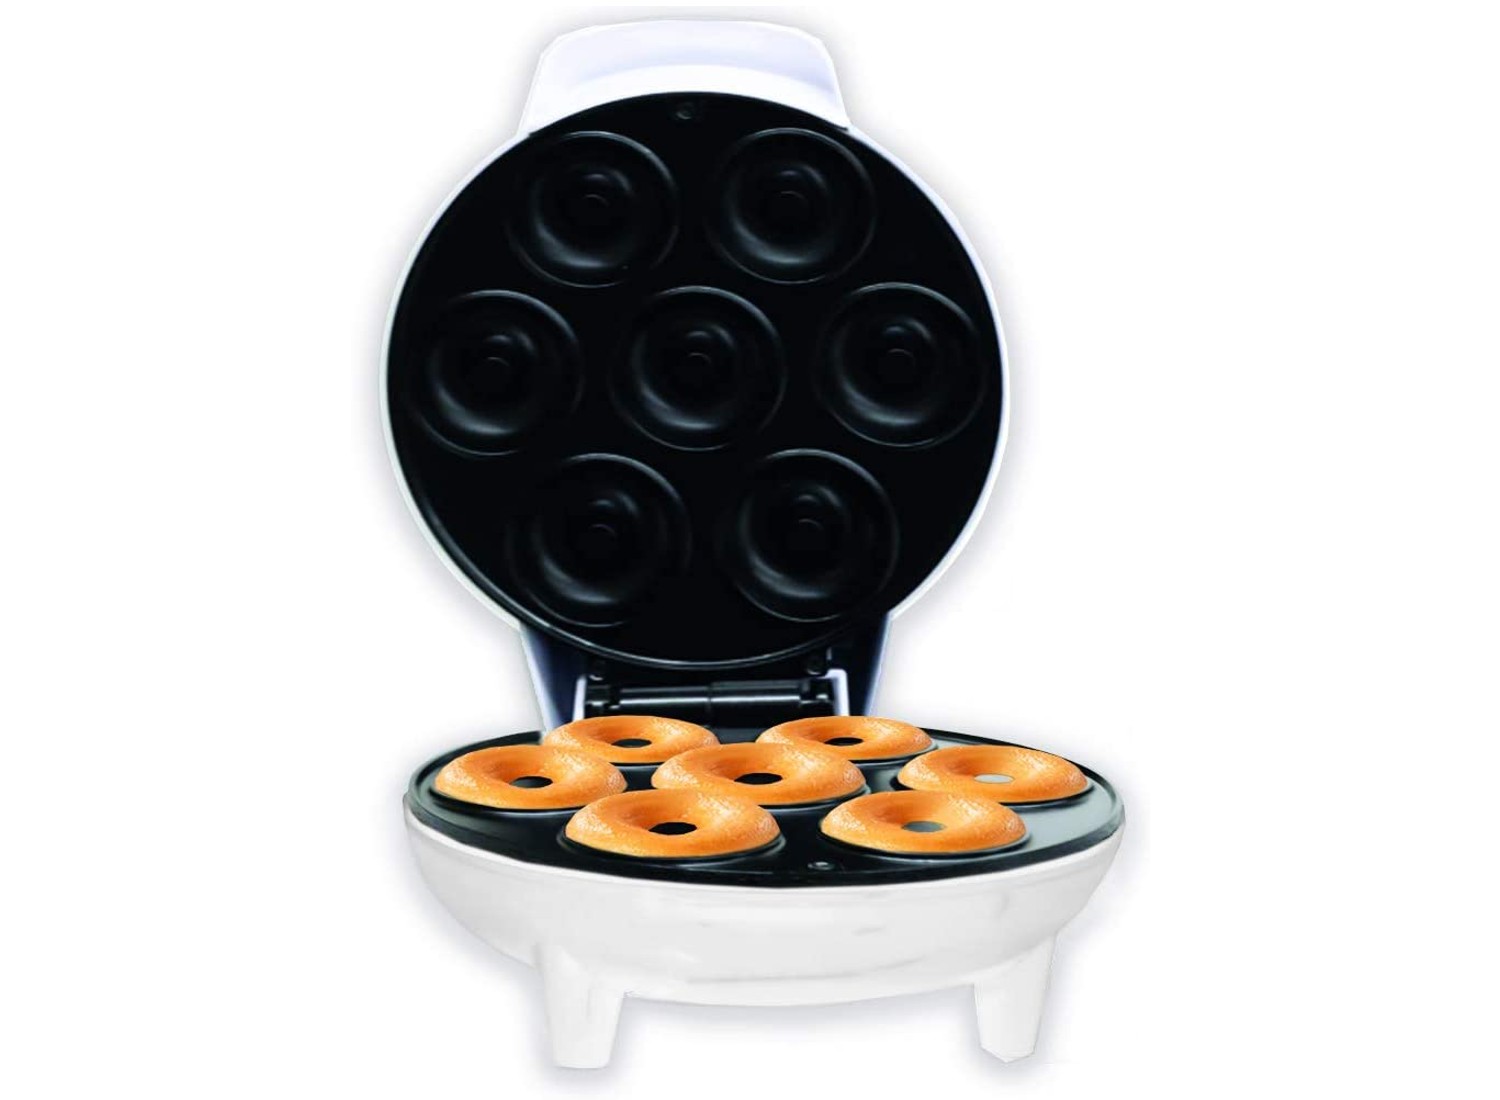 Mini Donut Maker Machine Small Doughnut Maker Electric Non-Stick Surface  Makes 7 Small Doughnuts Multifunctional Snack Maker With Nonstick Look for